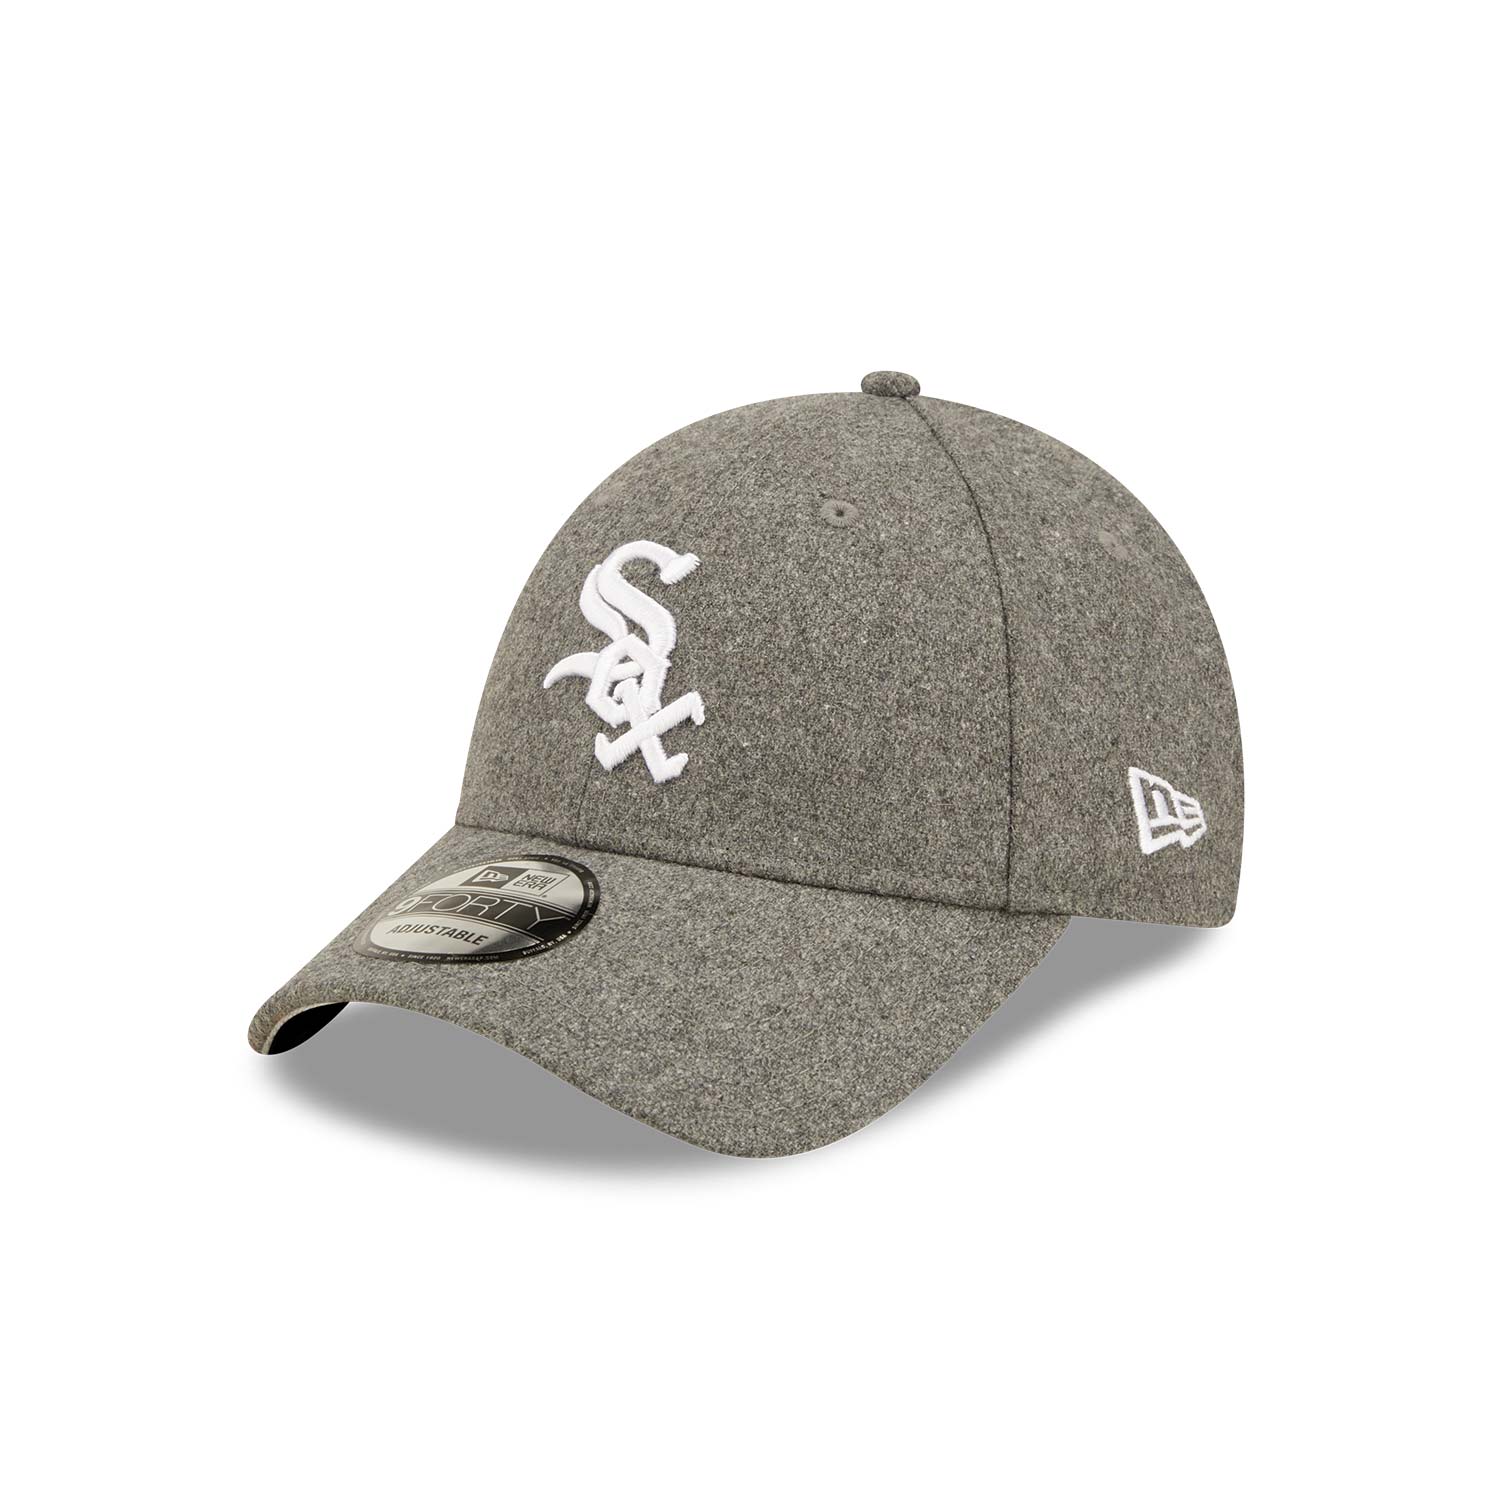 Official New Era Chicago White Sox Grey Wool 9FORTY Adjustable Cap ...